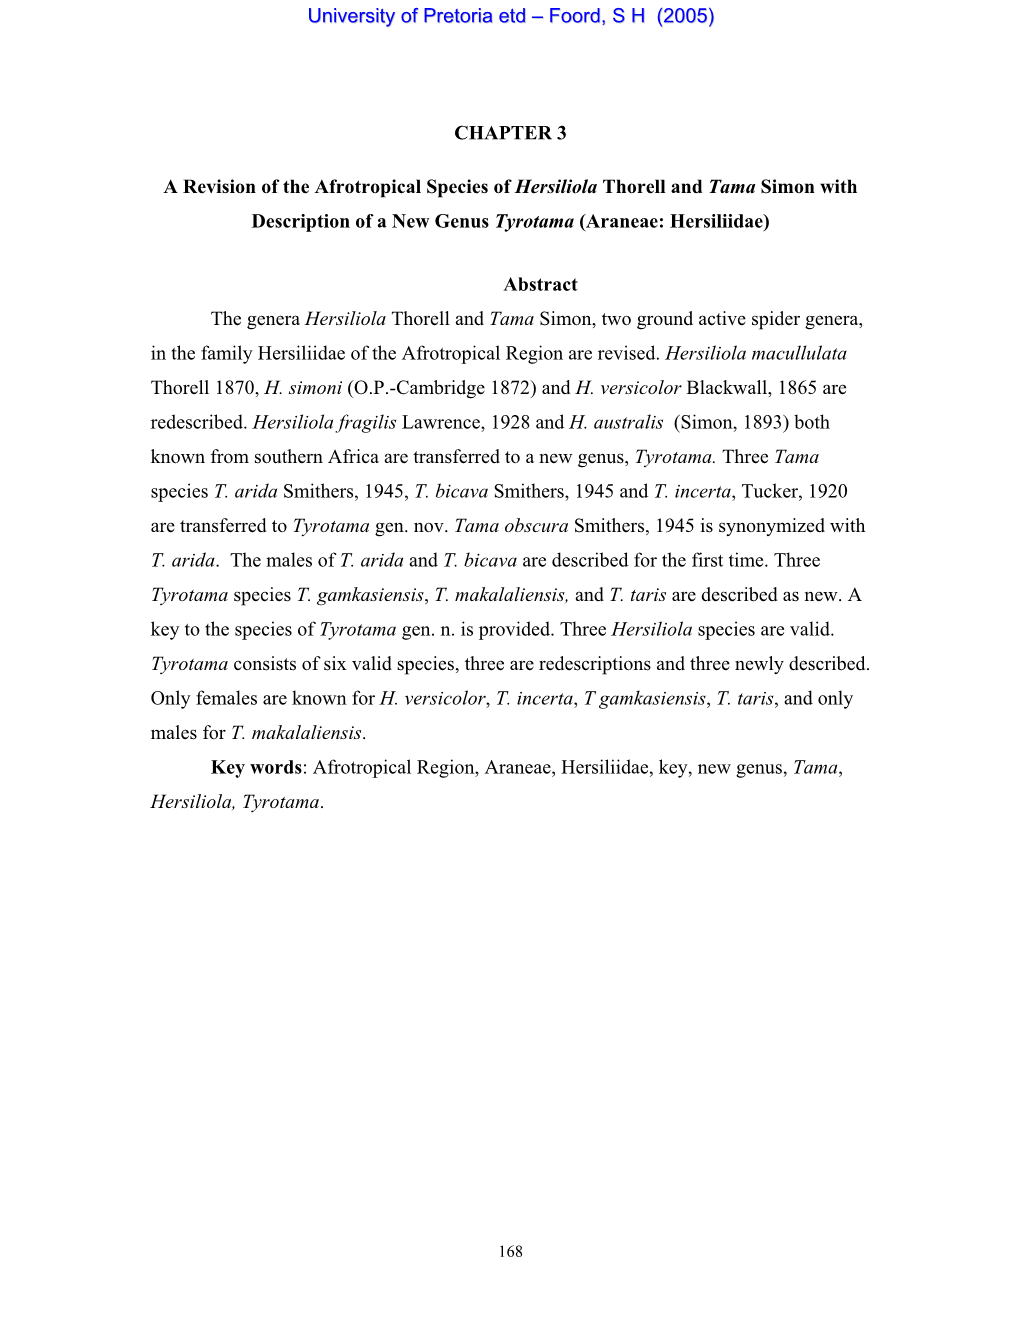 CHAPTER 3 a Revision of the Afrotropical Species of Hersiliola